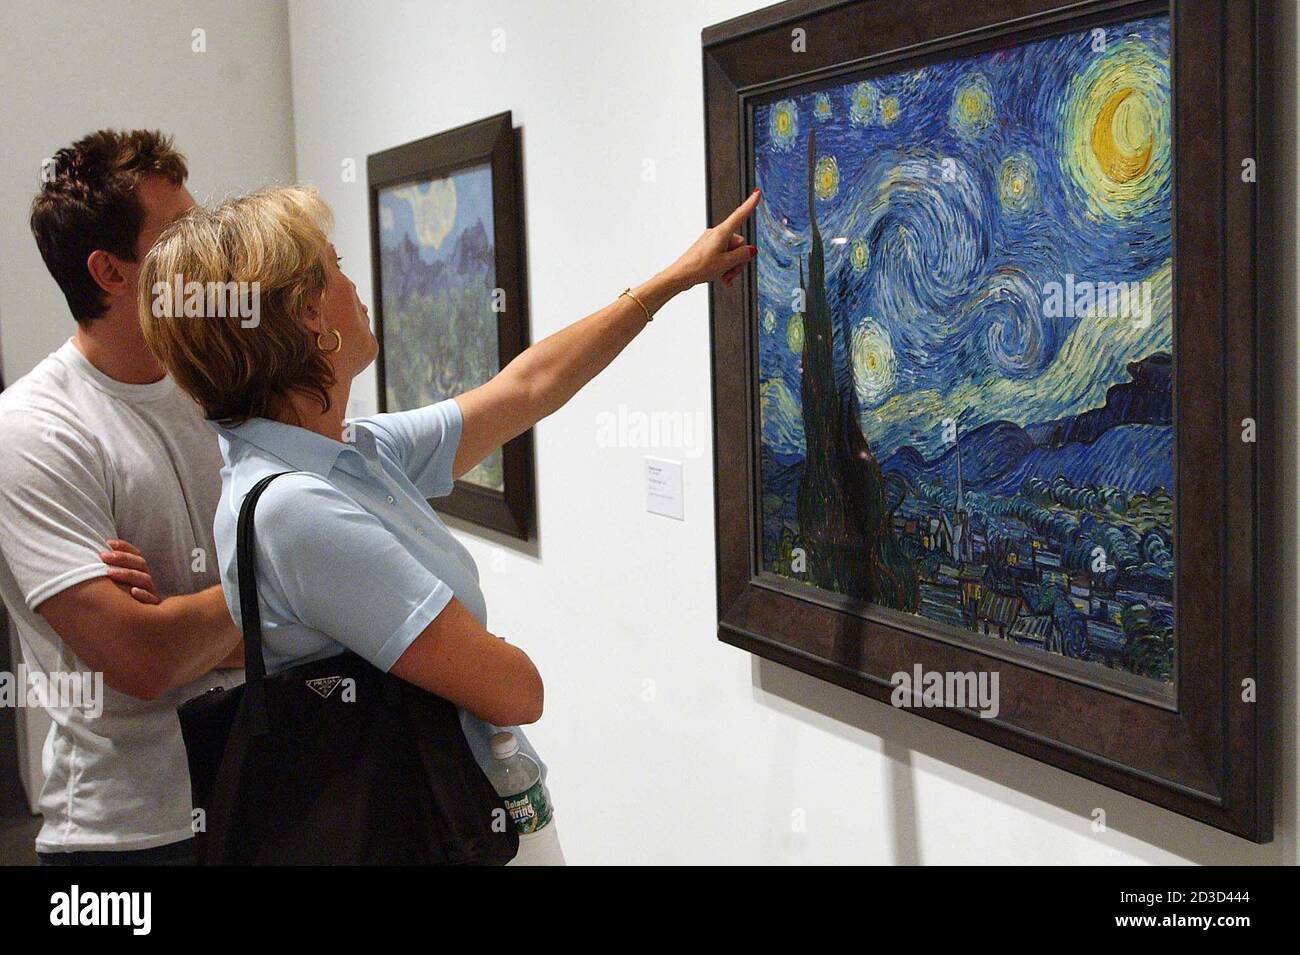 Irene Hoydysh points out features of Vincent van Gogh's painting "The Stary  Night" to her son Adam, at the grand opening of the Museum of Modern Art ( MoMA) in Queens, New York,